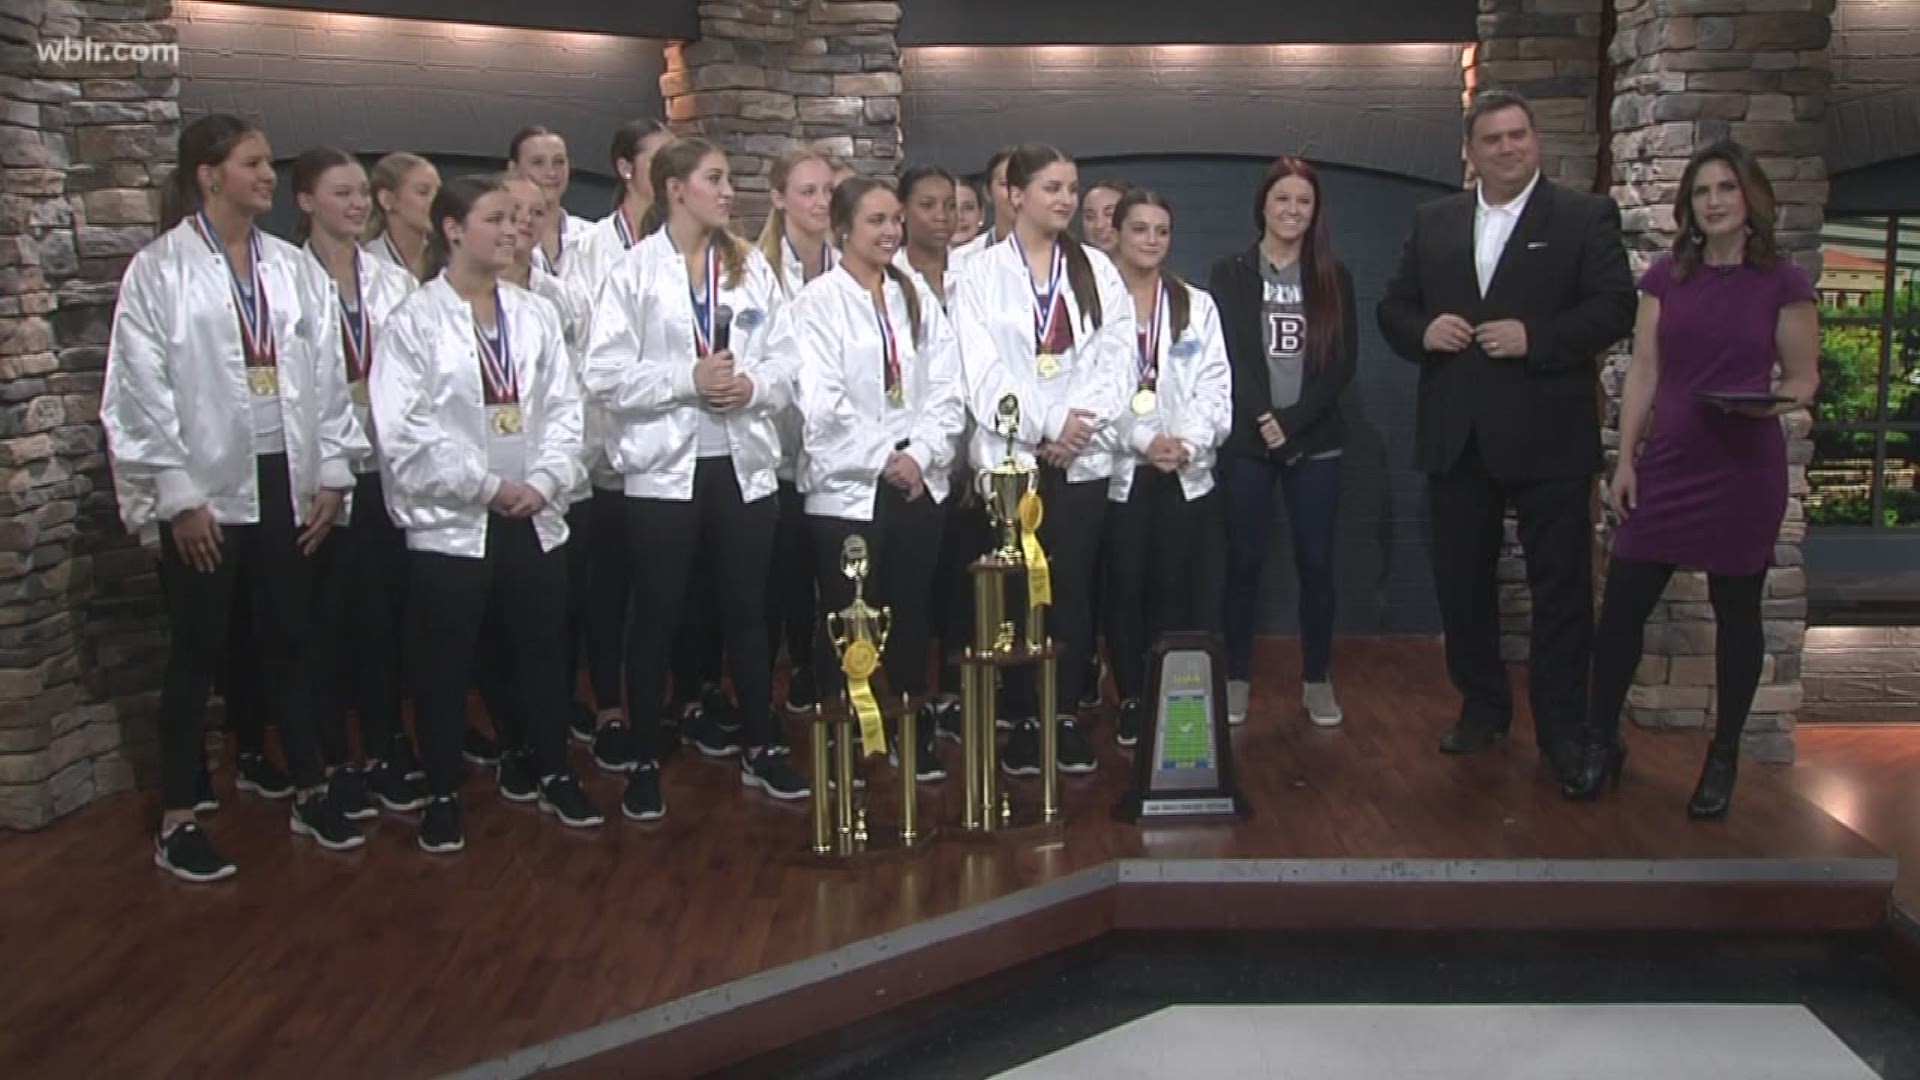 Bearden High School made history at the National Dance Team Championship in Orlando. They won double national championship titles. Feb. 5, 2019-4pm